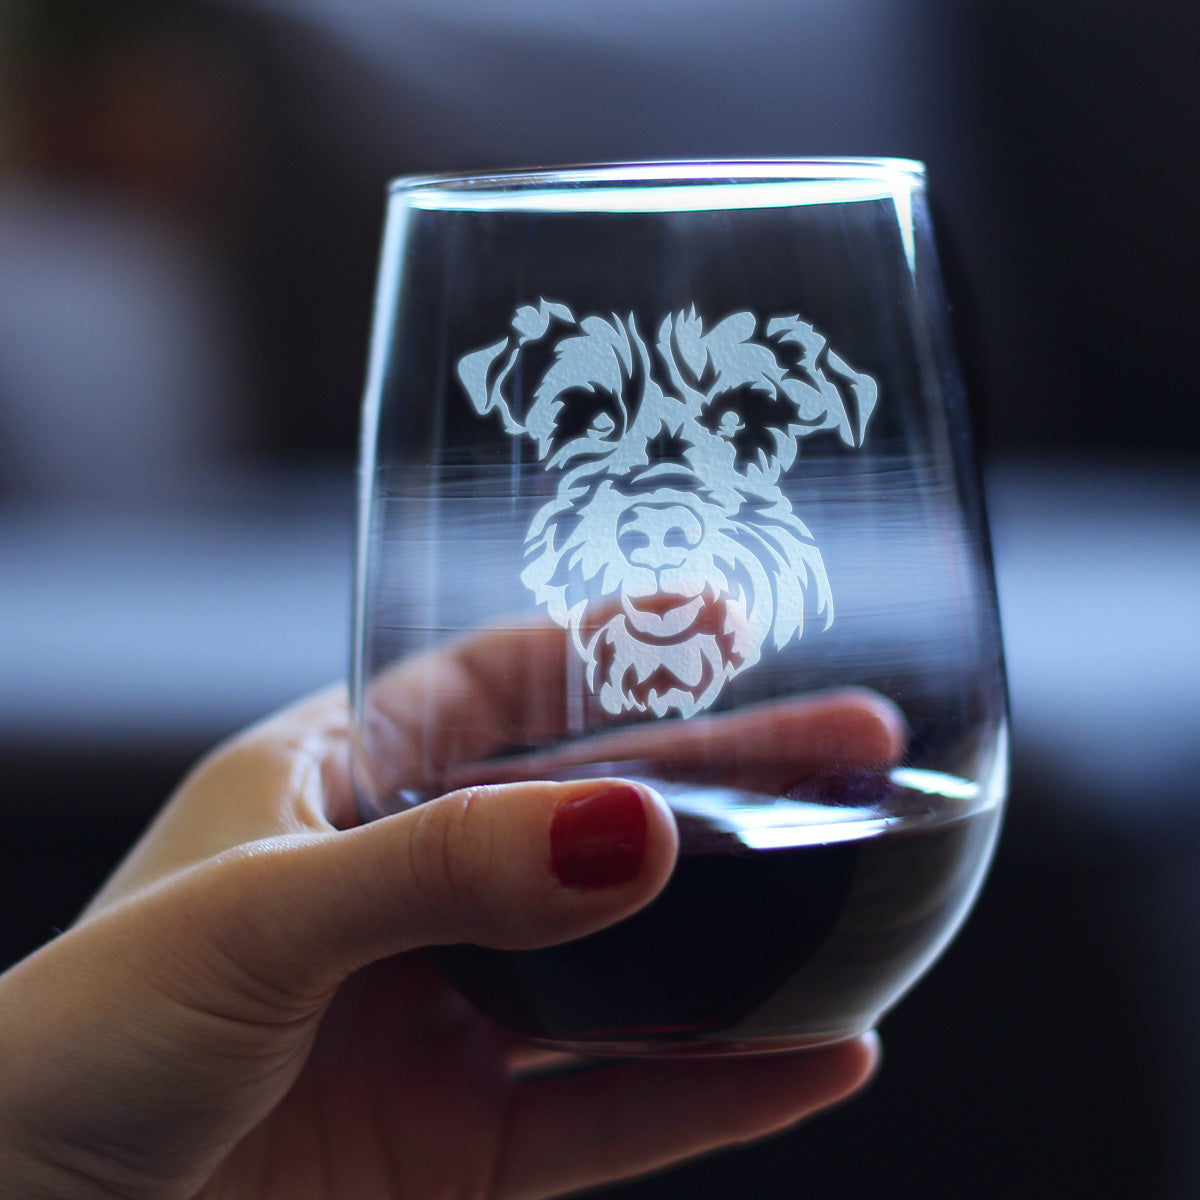 Schnauzer Face Stemless Wine Glass - Cute Dog Themed Decor and Gifts for Moms &amp; Dads of Schnauzers - Large 17 Oz